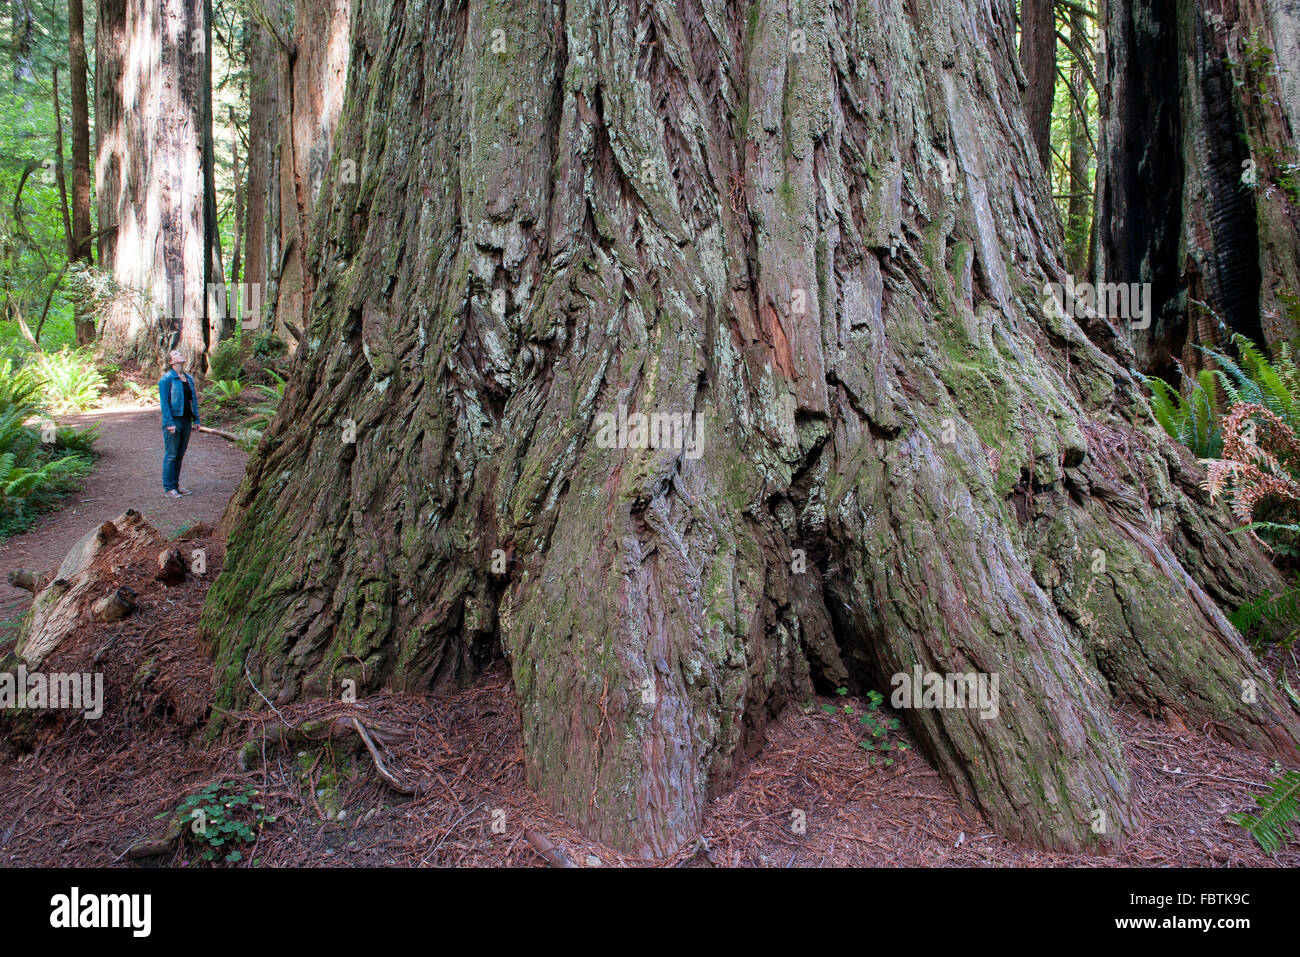 Woman standing at foot of giant redwood tree in Redwood National Park, California, USA Stock Photo